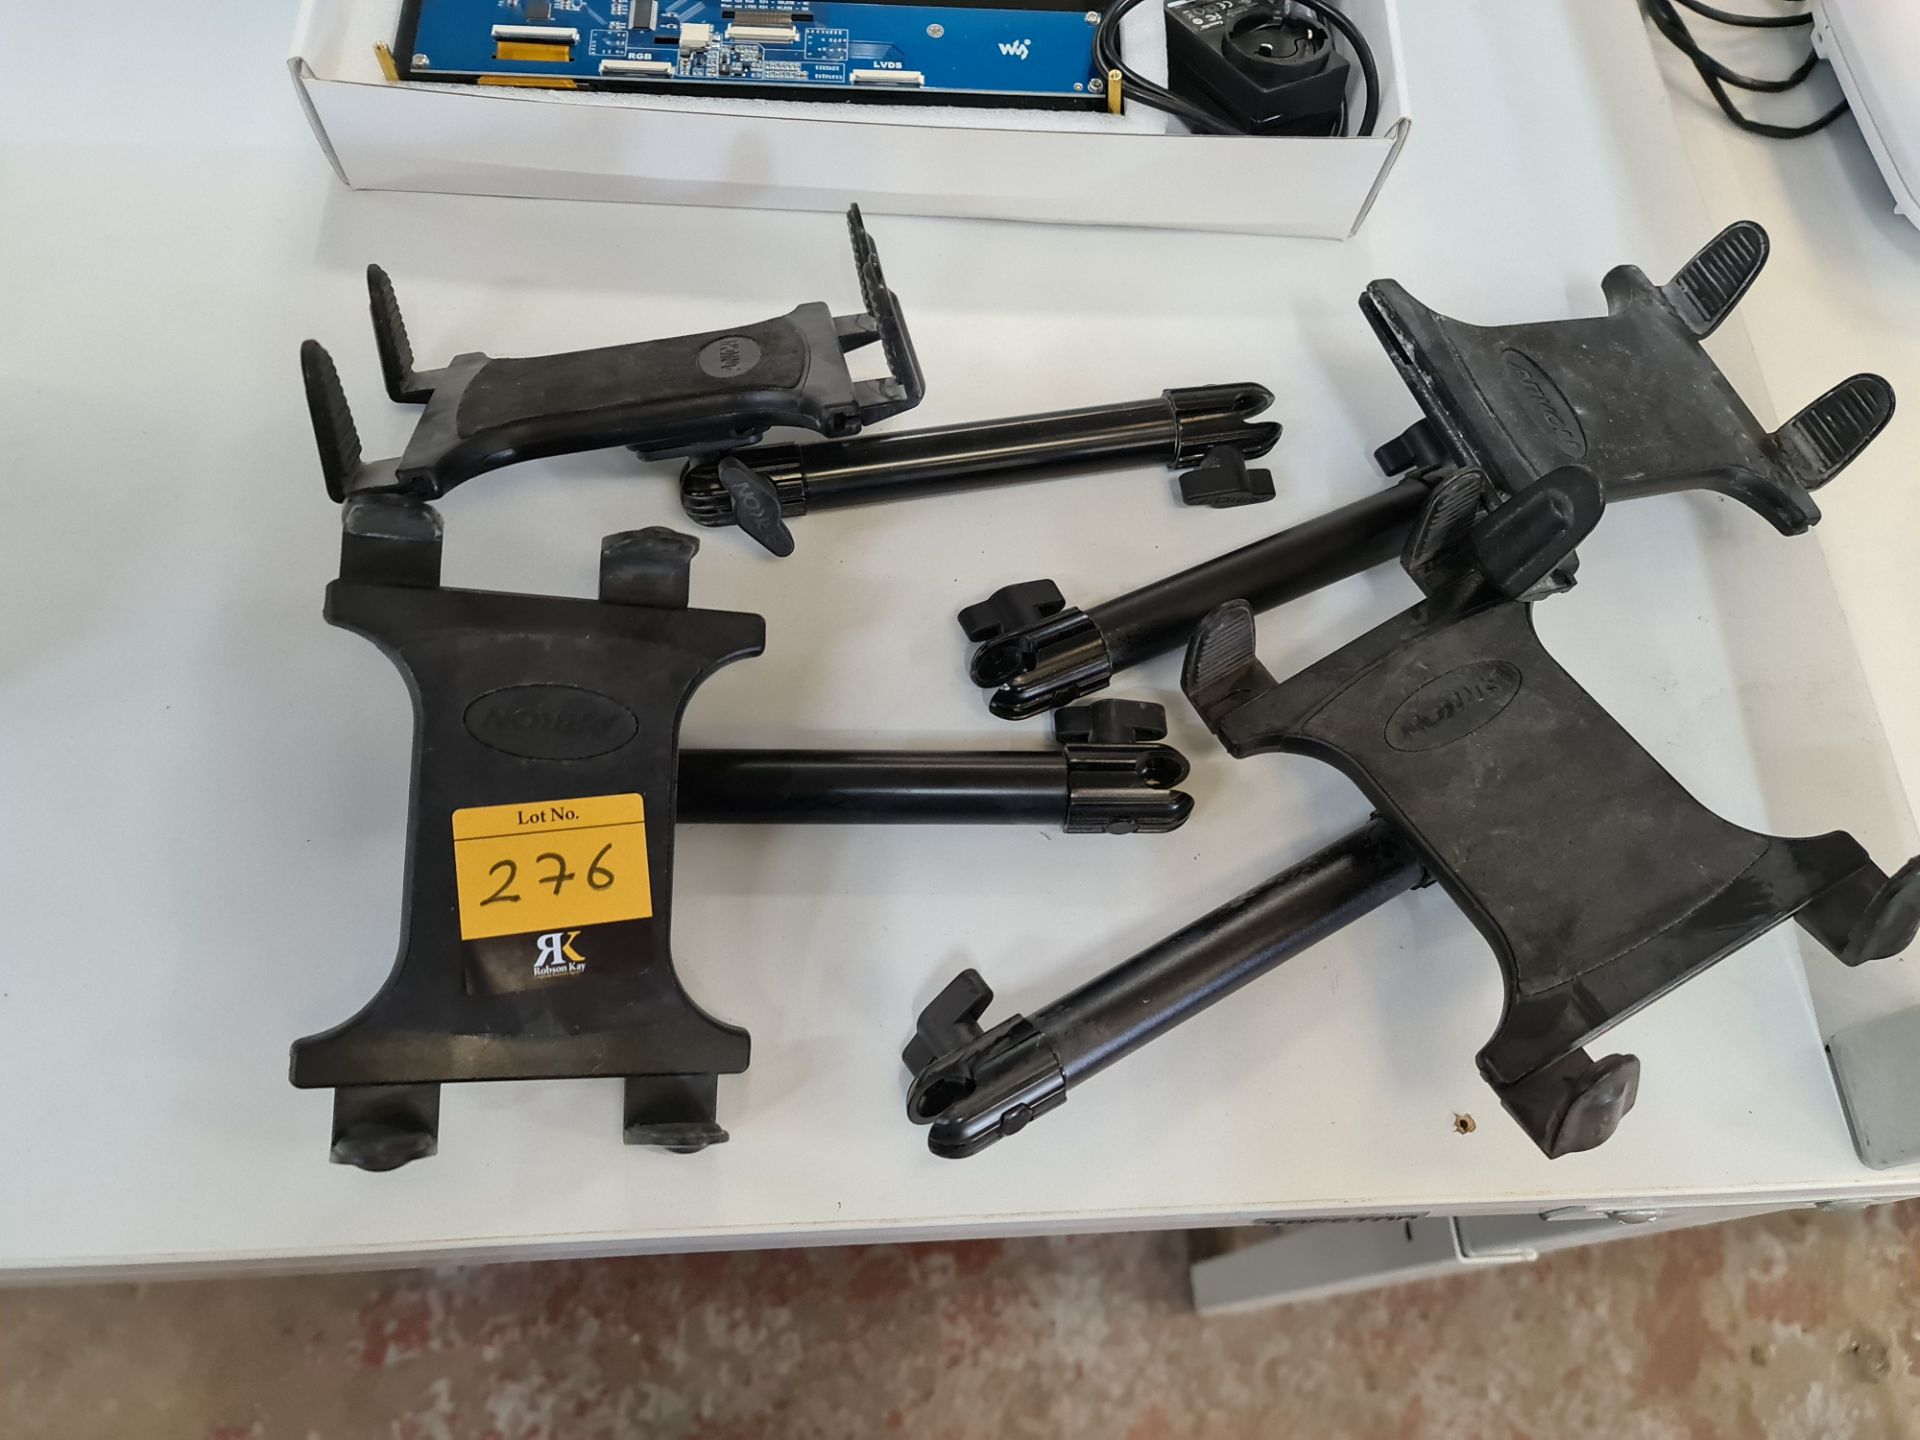 Tablet component plus 4 off tablet mounts - Image 3 of 6